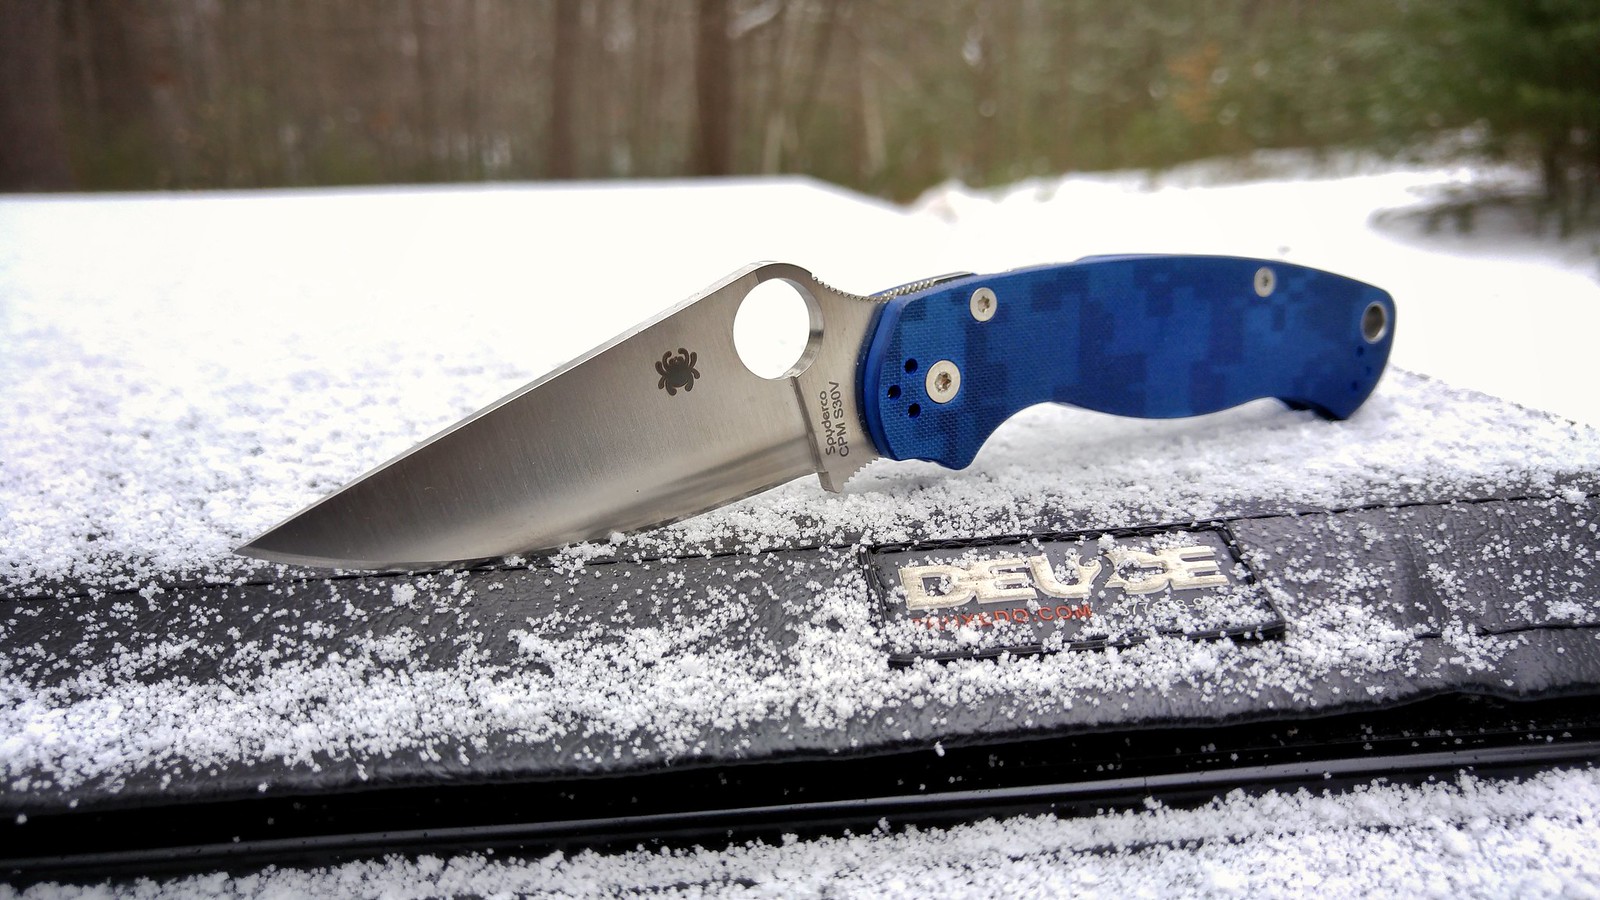 Review - How does Rit Dyed Spyderco FRN hold up?